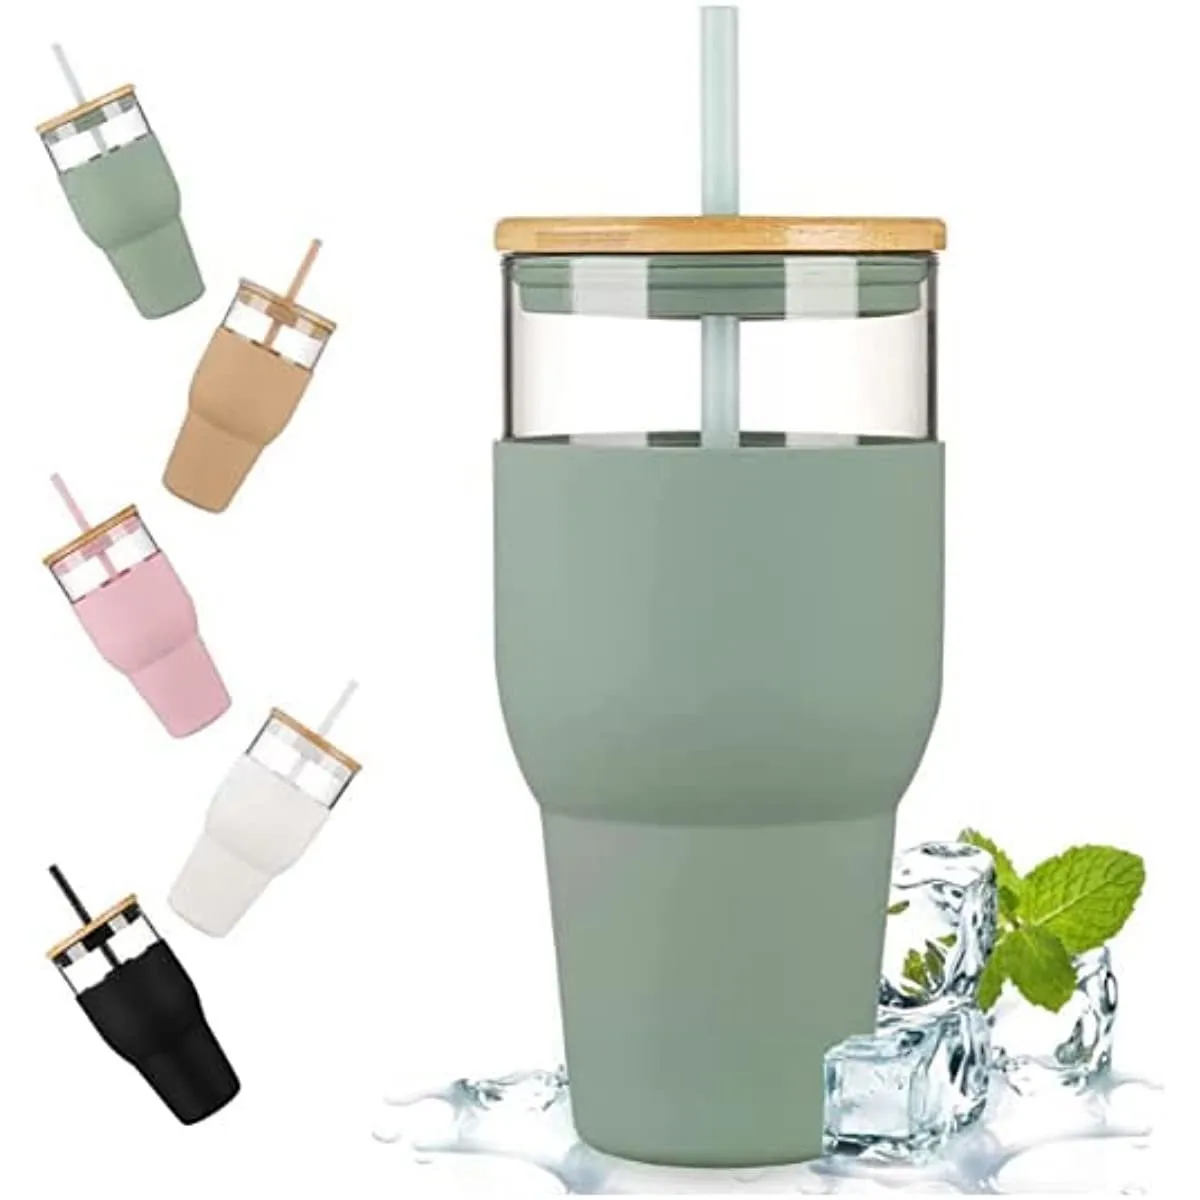 32oz Glass Tumbler with Straw and Lid Reusable Boba Smoothie Cup Iced Coffee Tumbler with Silicone Sleeve Fits Cup Holder Glass Water Bottle BPA Free